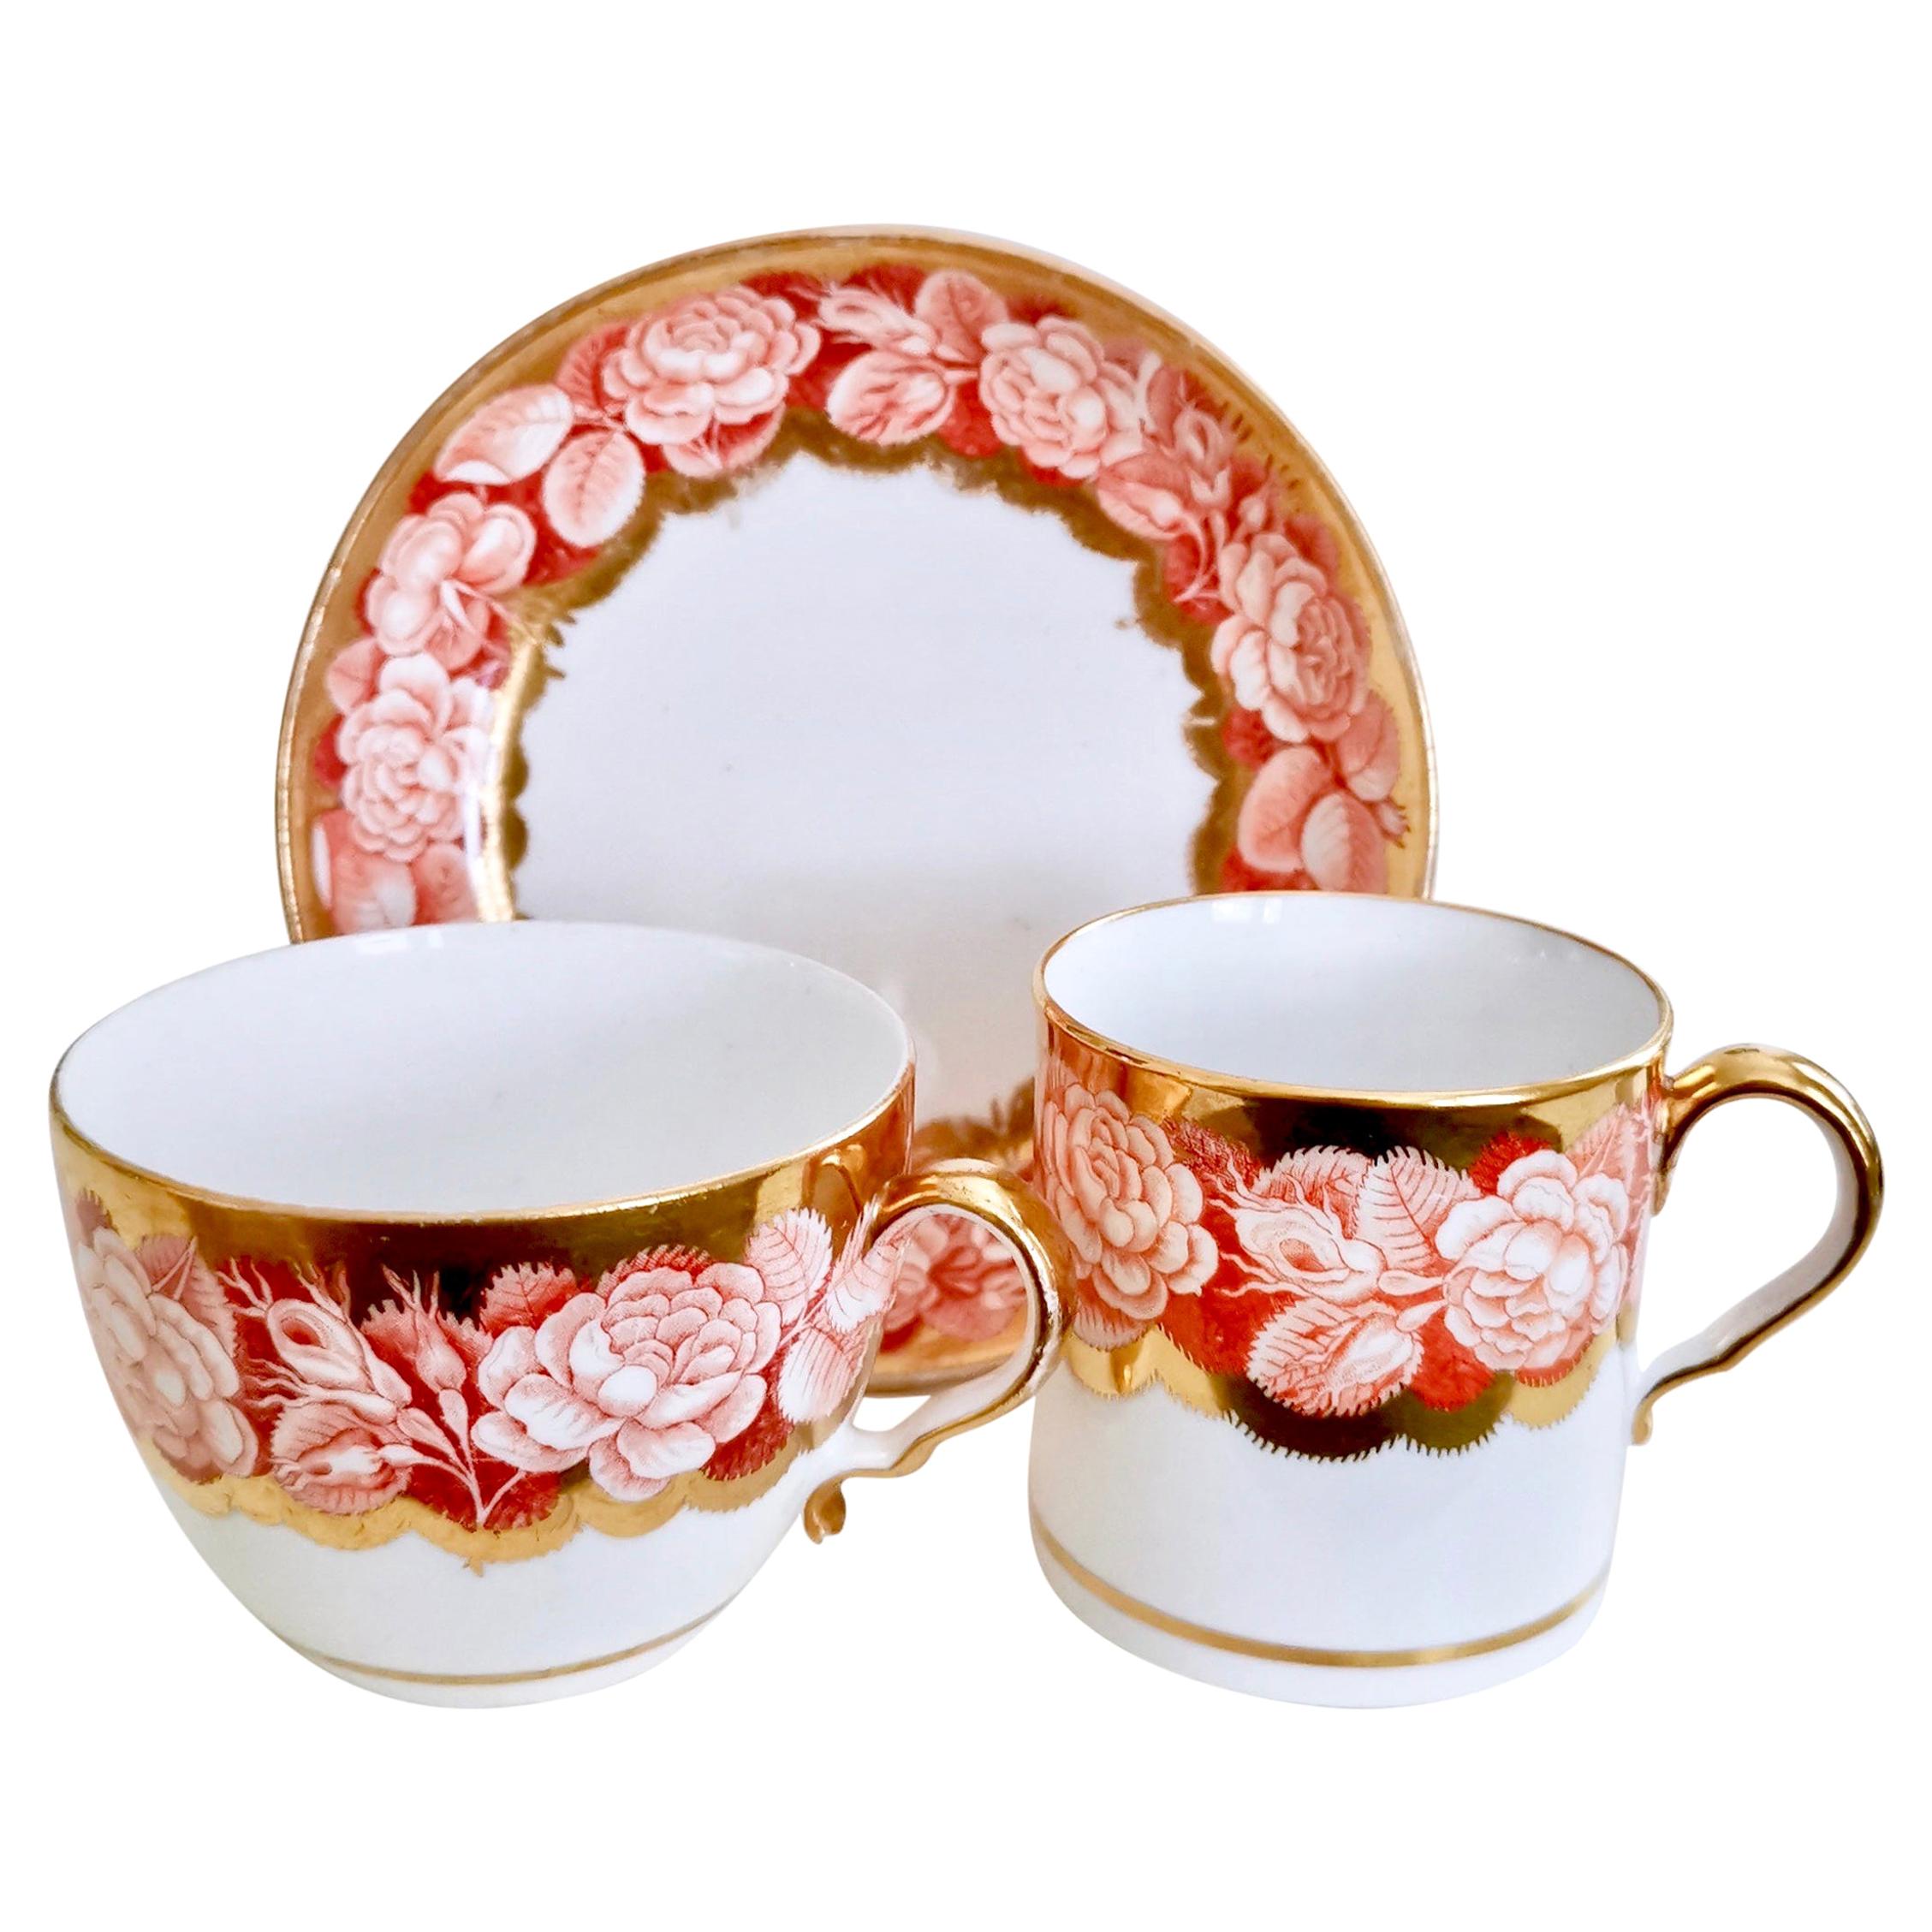 Spode Teacup Trio, Red Pluck and Dust Rose Border, Georgian, circa 1806